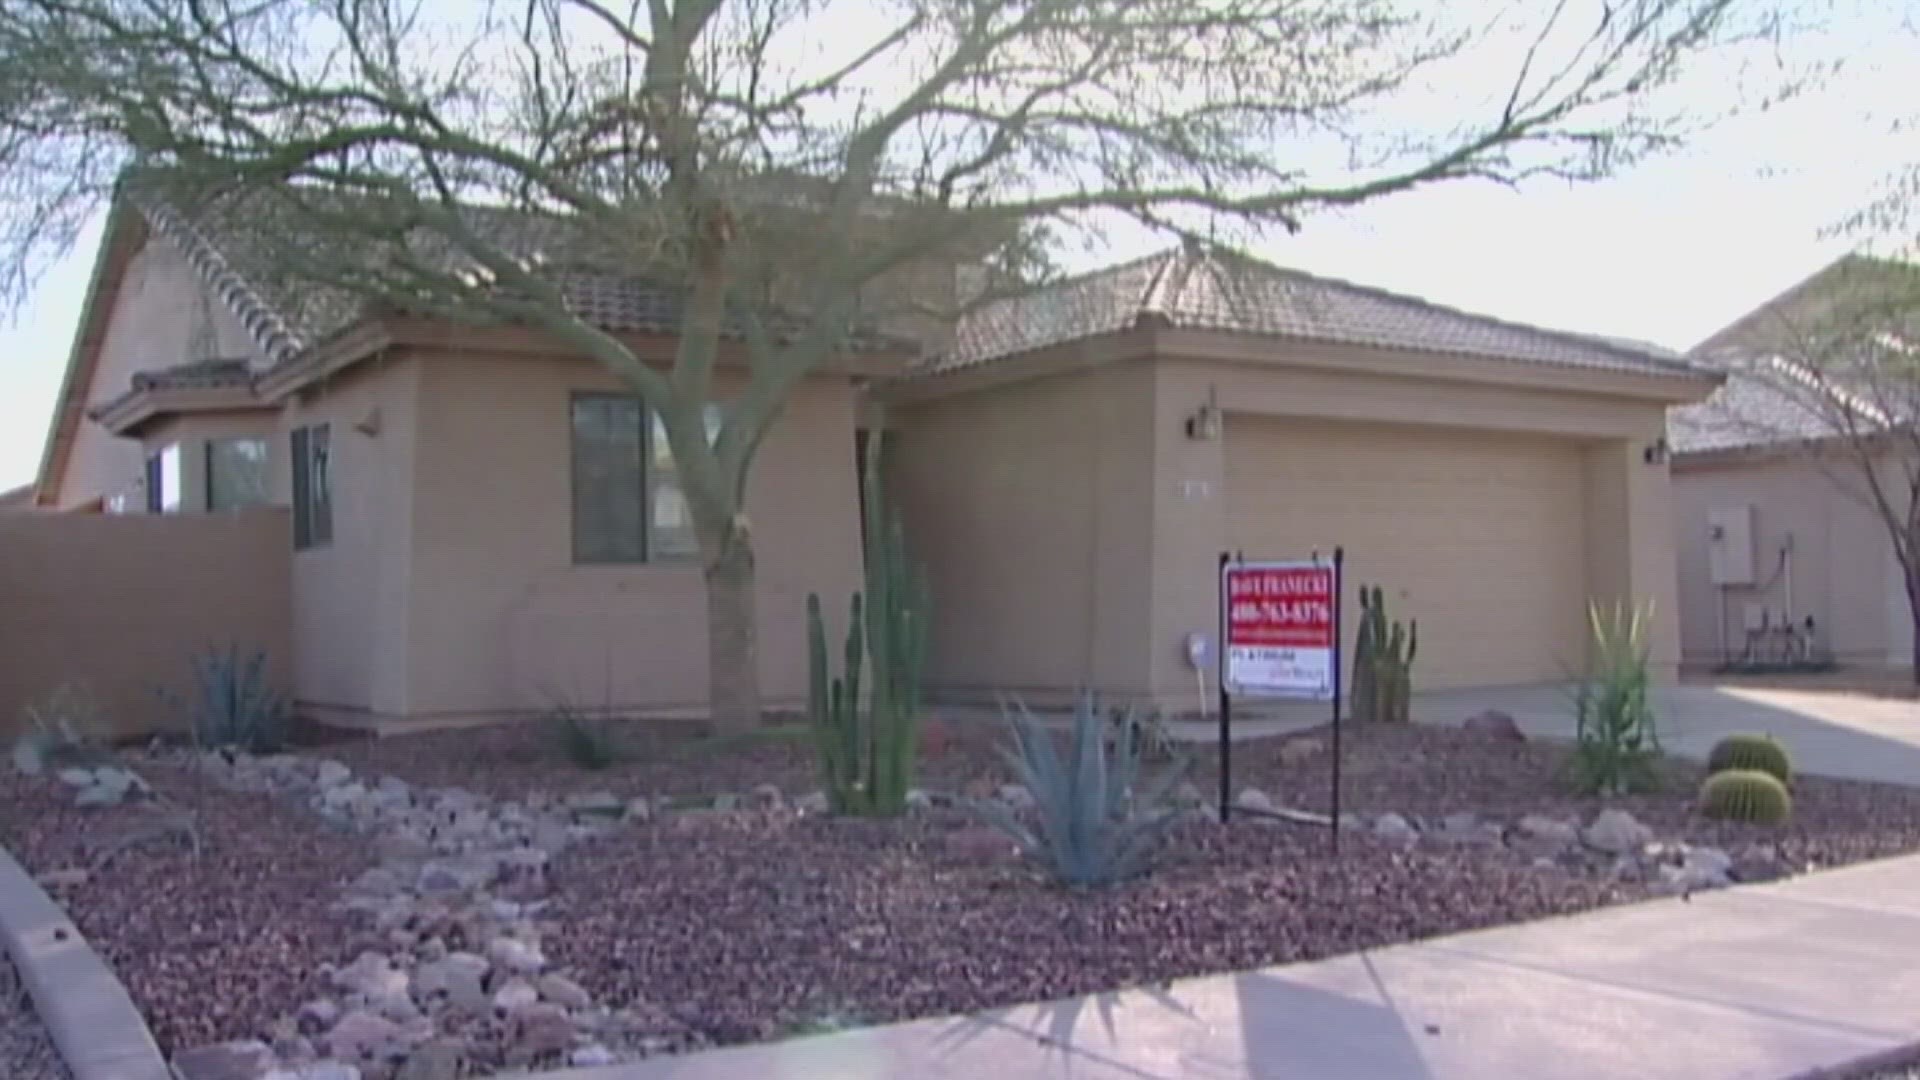 A new report from Zillow says home values are peaking in the Phoenix area. Here's what that means for buyers and sellers in the Valley.